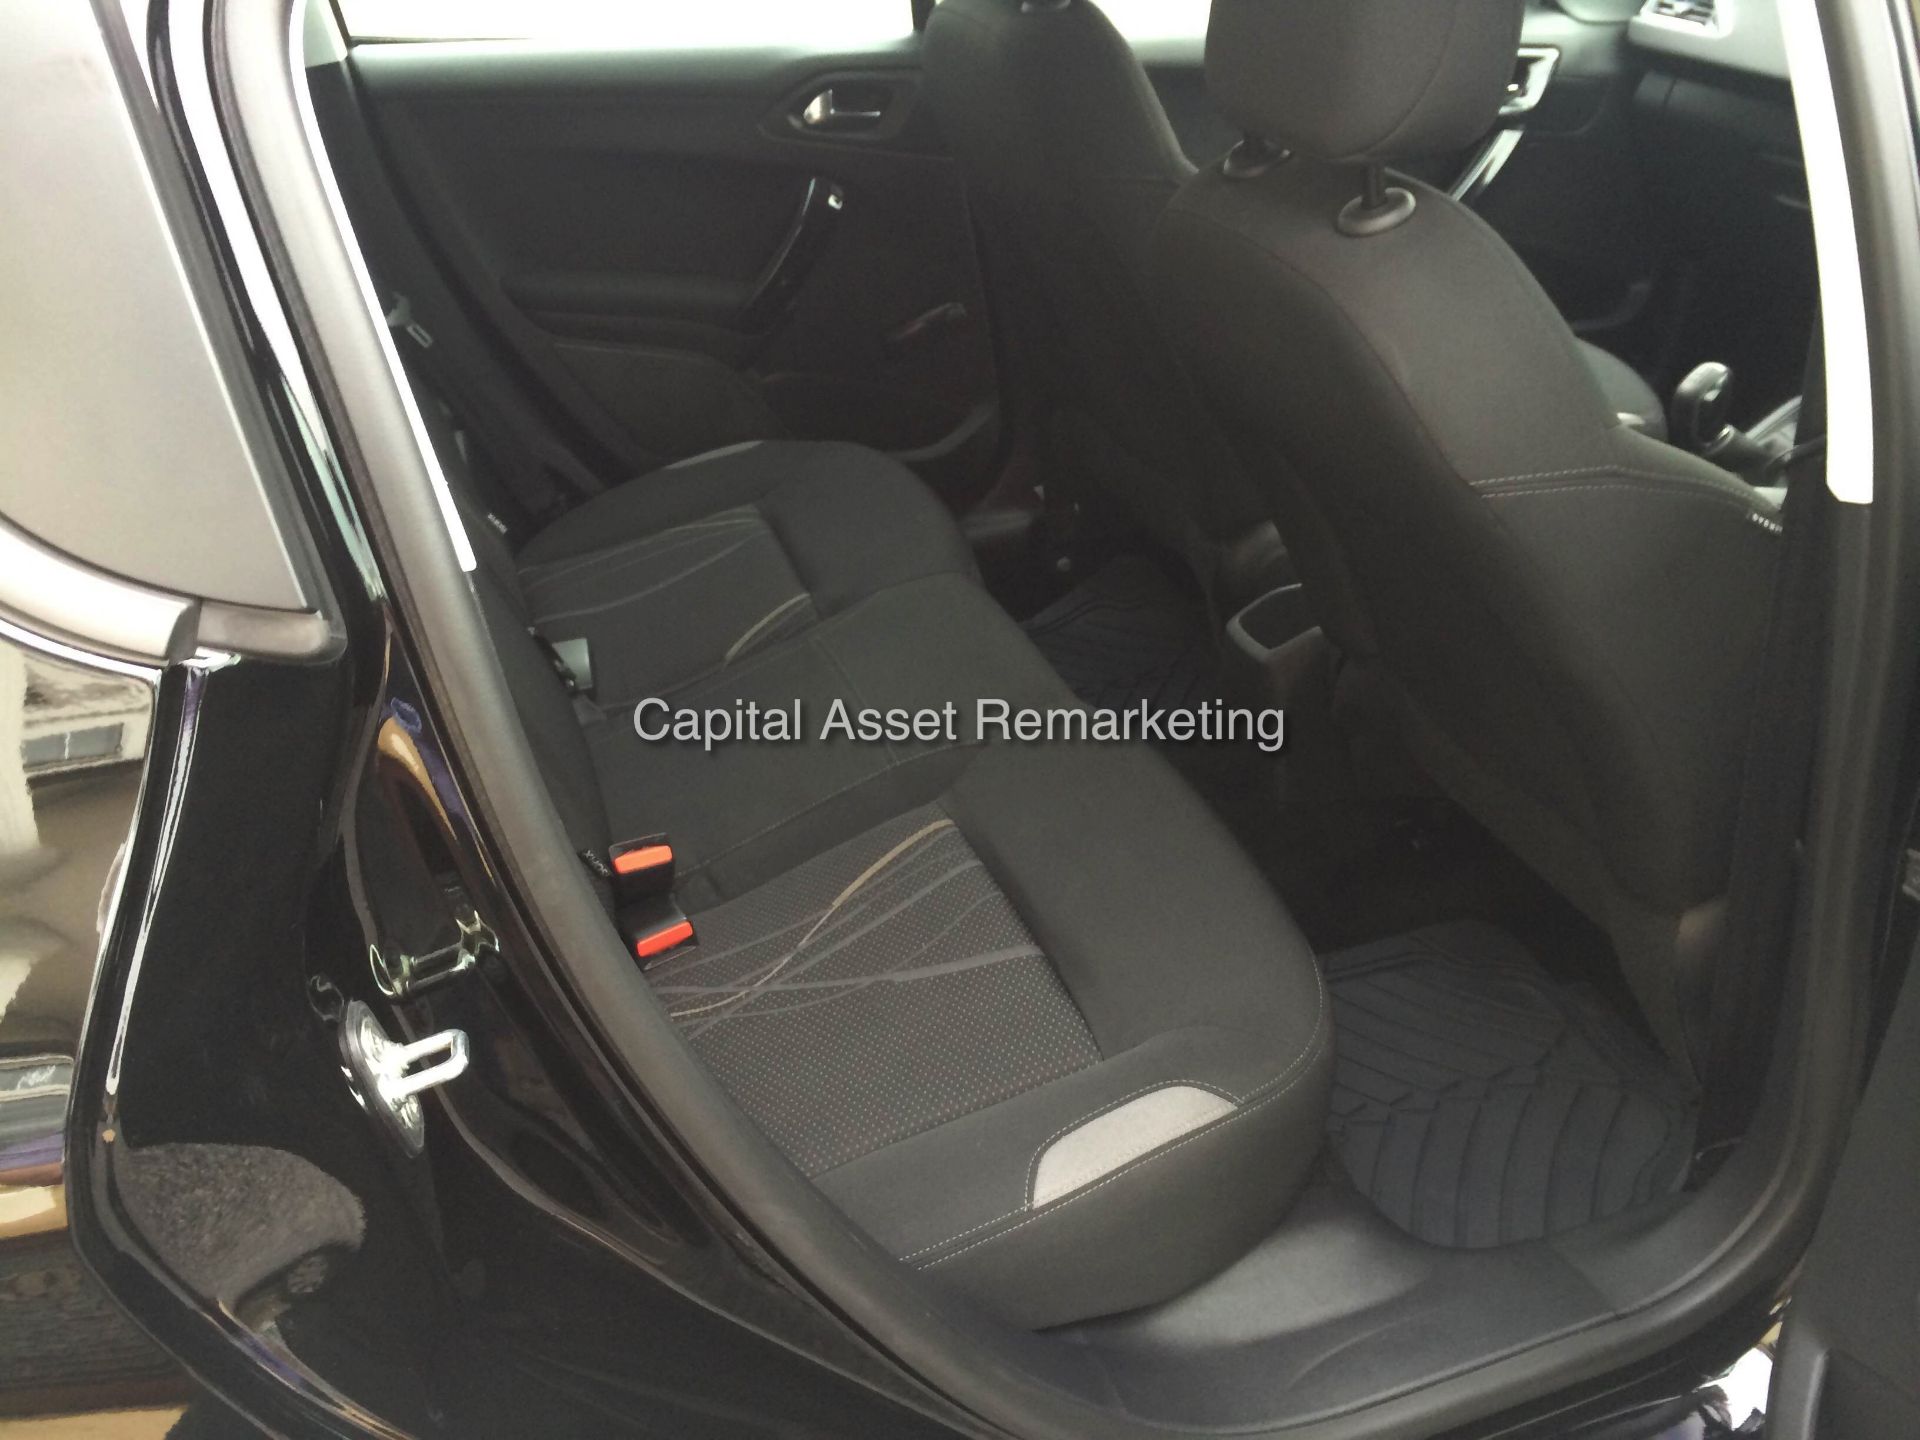 PEUGEOT 208 1.4 HDI 'ACTIVE' 5 DOOR (2014 - 14 REG)  **OWNED BY PEUGEOT FROM NEW** - Image 11 of 15